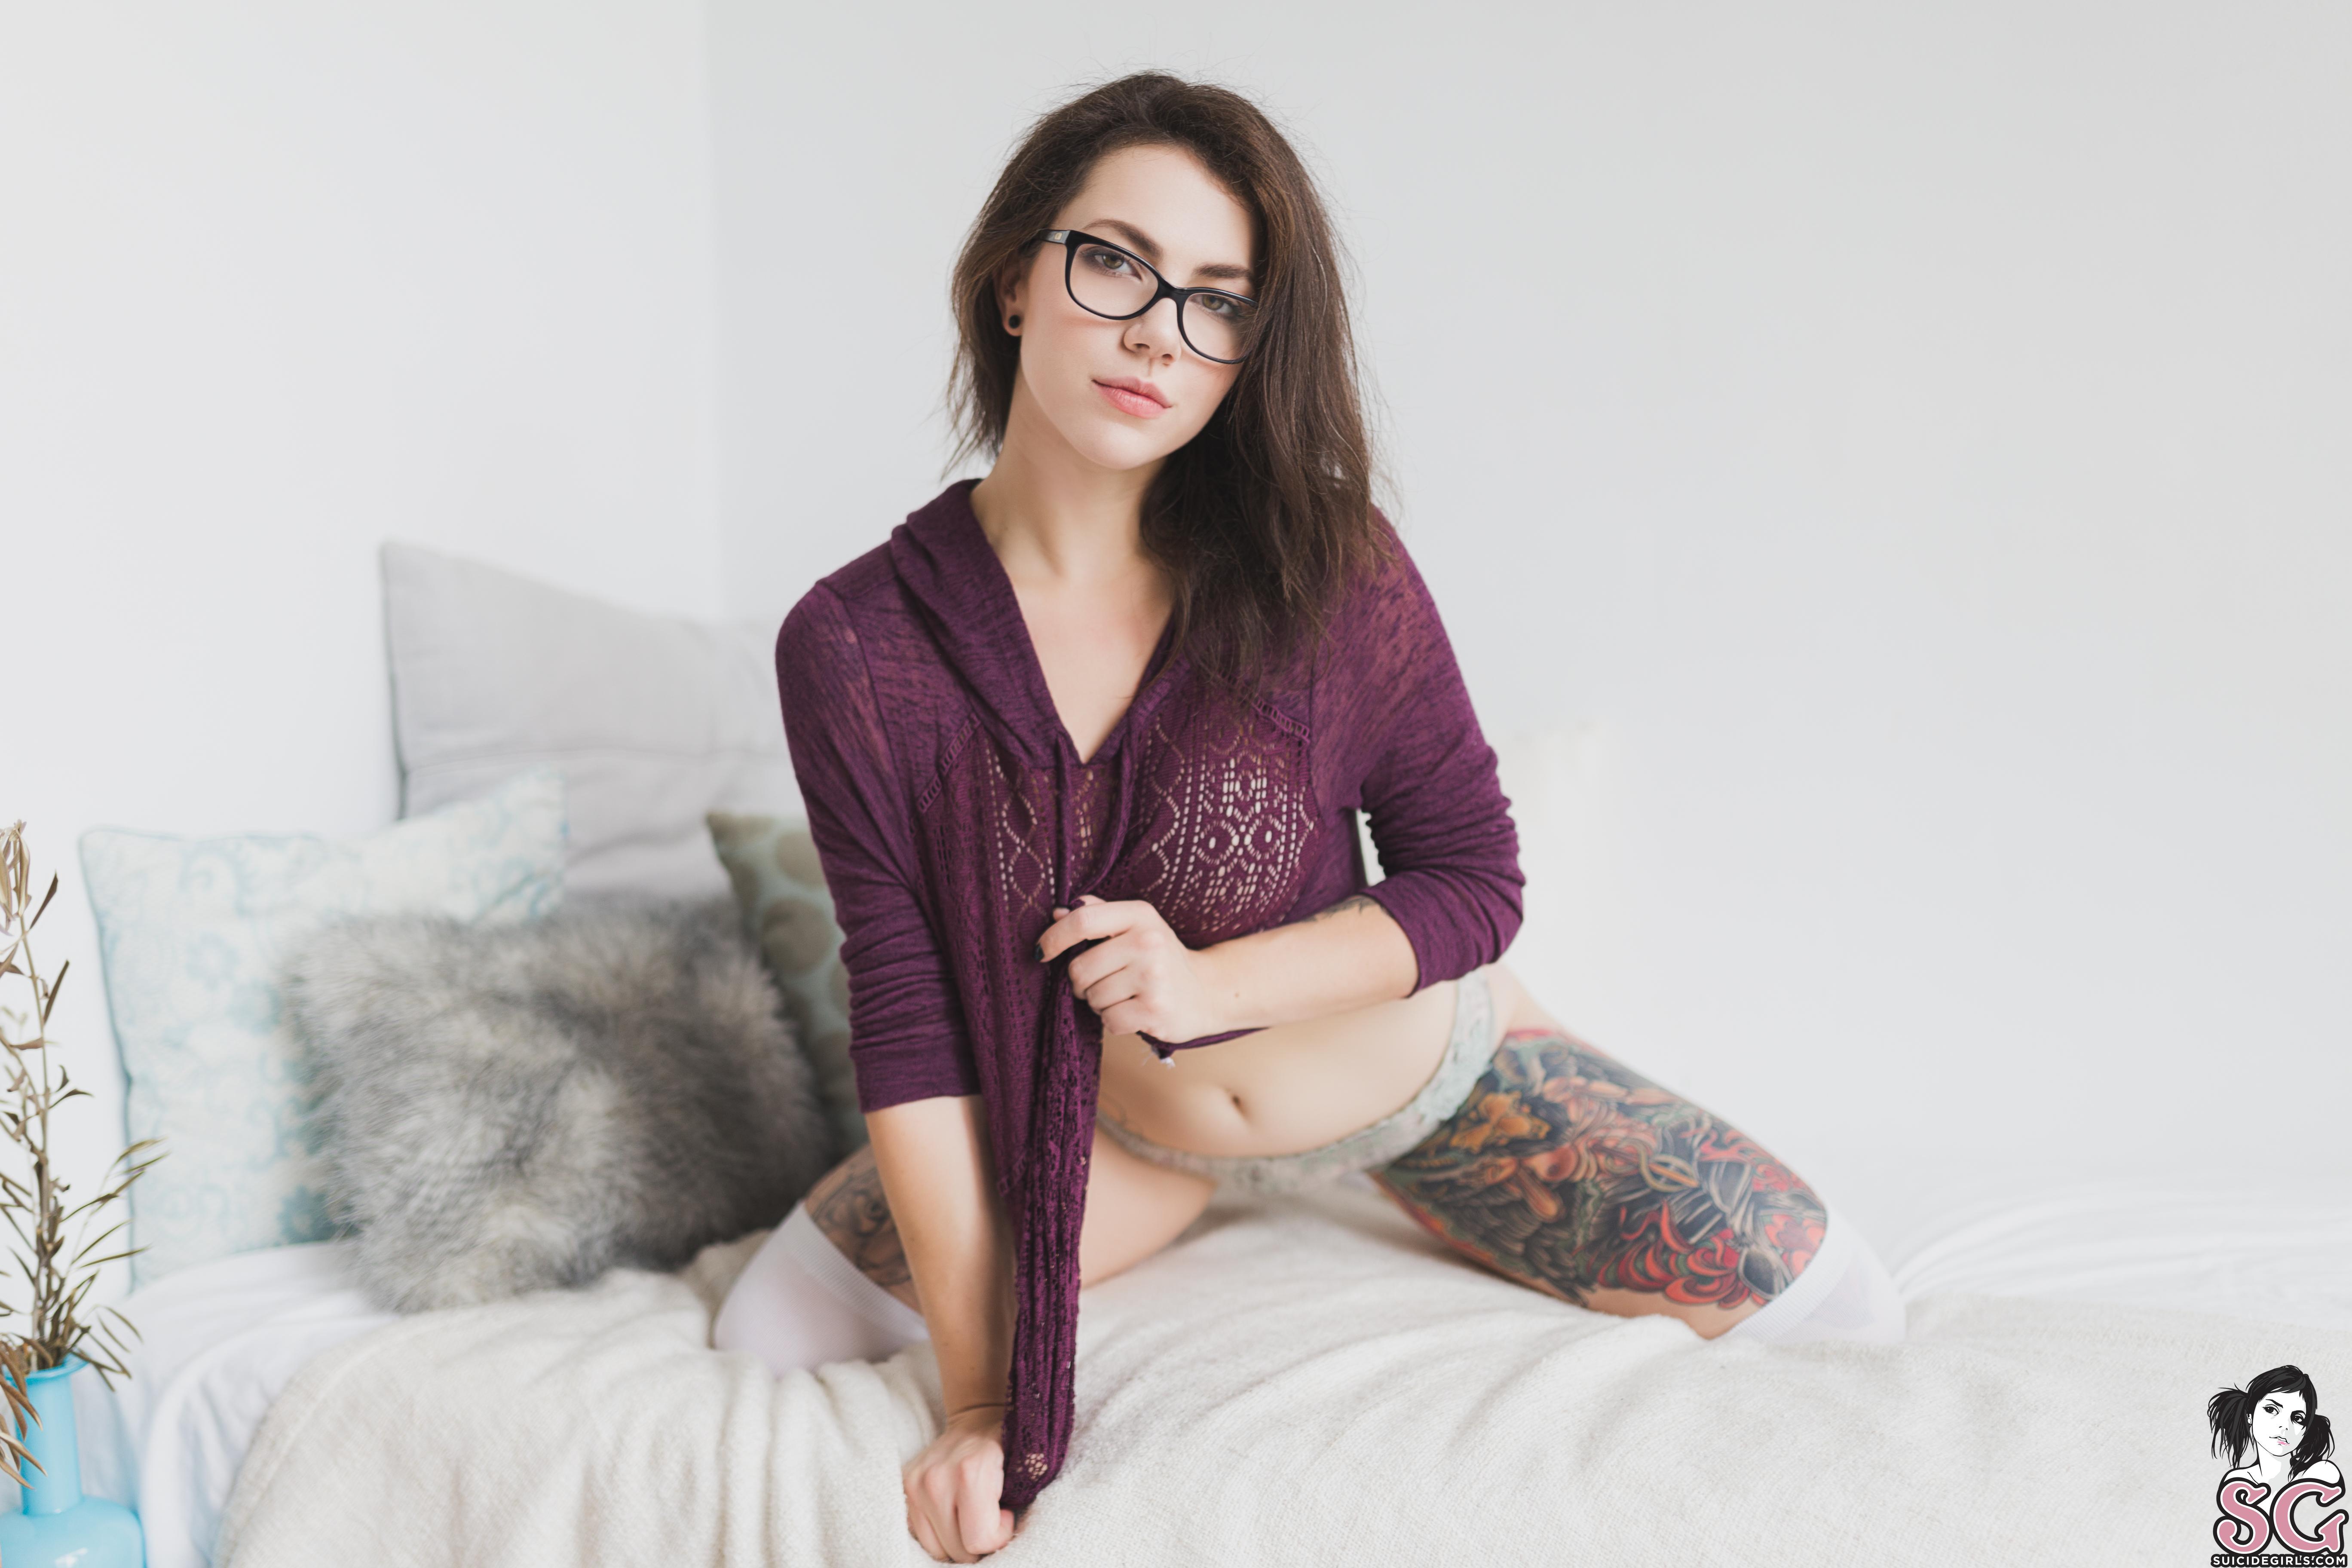 People 5472x3648 Milenci Suicide Girls model underwear socks women with glasses tattoo inked girls women looking at viewer smiling belly panties kneeling depth of field in bed pillow holding clothes indoors women indoors white socks OTK socks